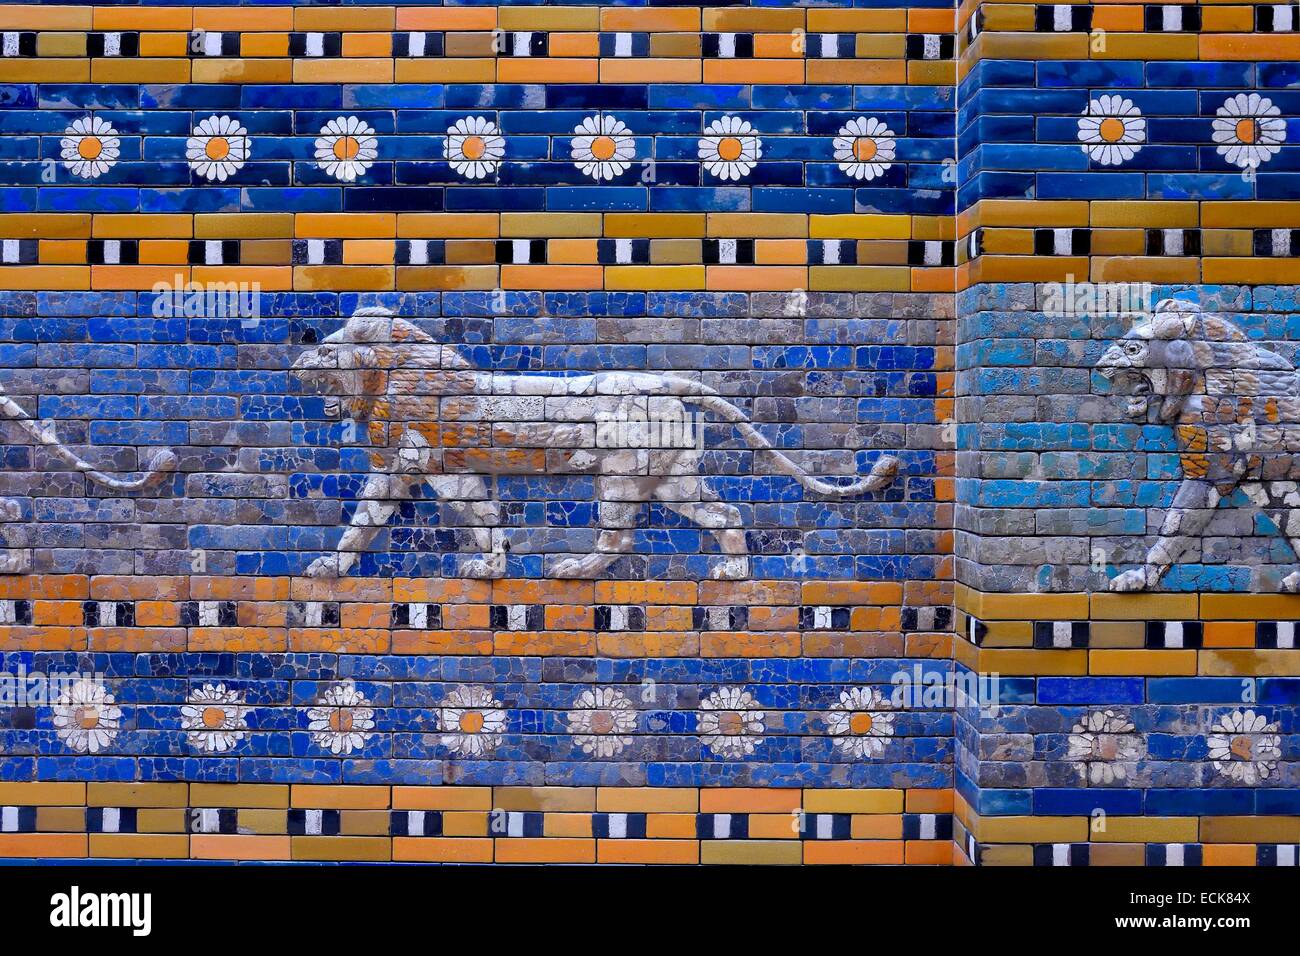 Germany, Berlin, Museum Island, listed as World Heritage by UNESCO, Pergamon Museum (Pergamonmuseum), Ishtar Gate, built in 580 BC (Neo Babylonian Empire) by King Nebuchadnezzar II in Babylon (Irak), antique ceramic frieze with lions Stock Photo